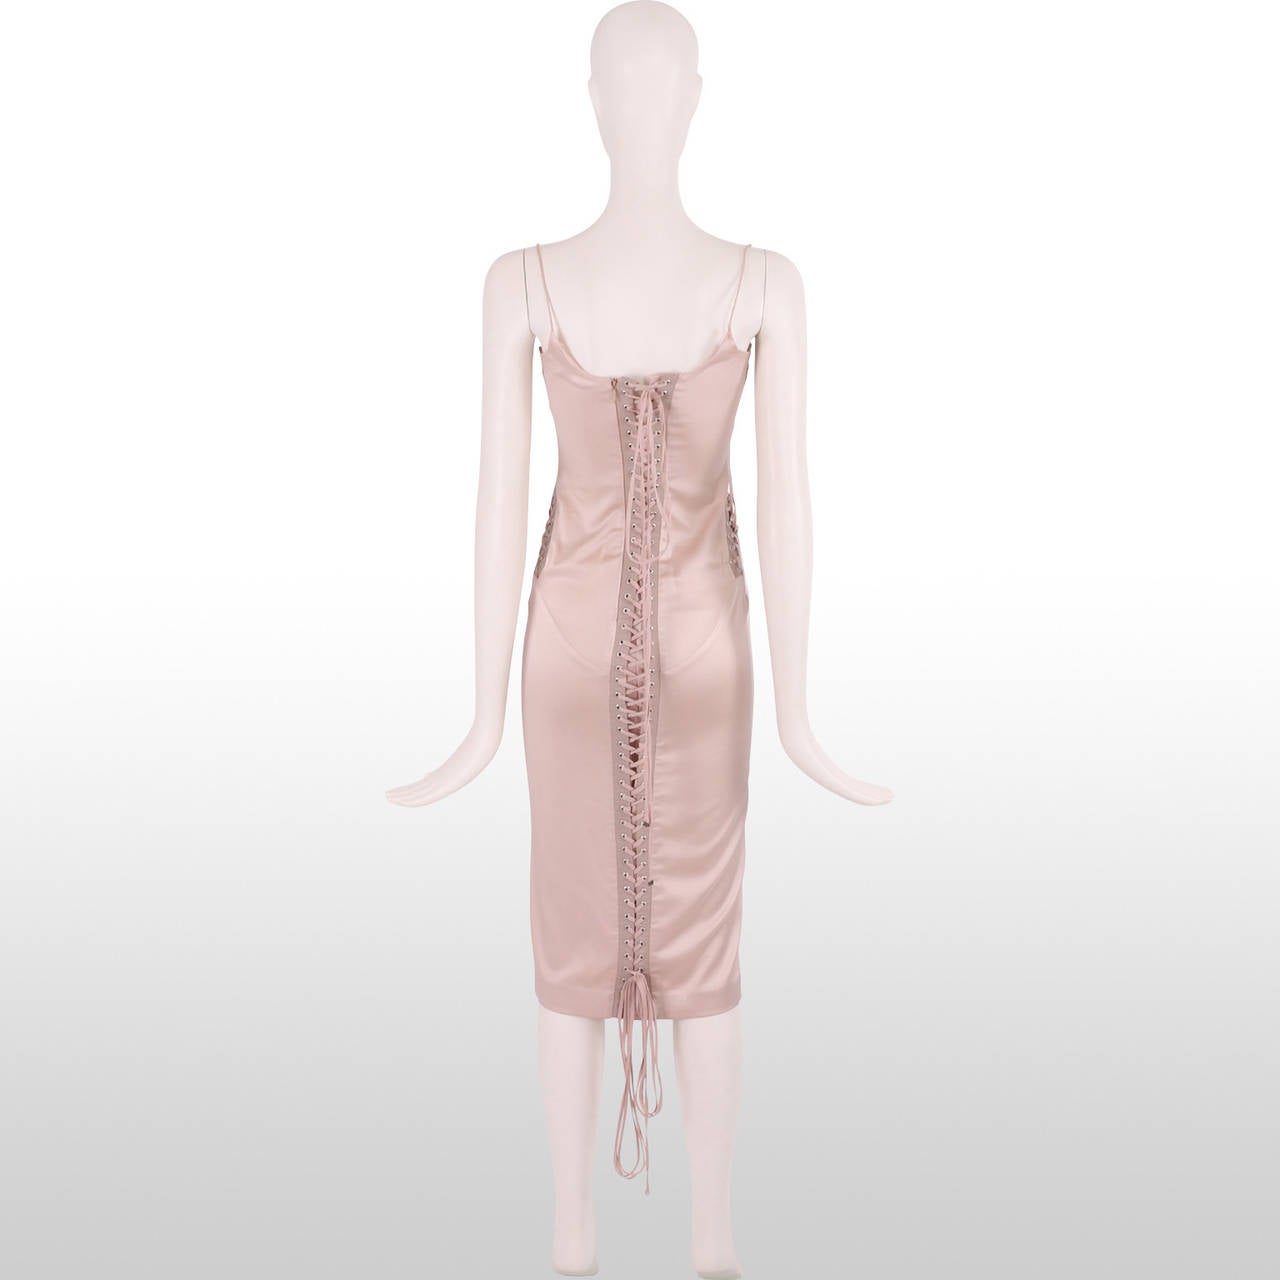 Dolce and Gabbana S/S 2003 Powder Pink Lace Up Dress - size S In Excellent Condition For Sale In London, GB